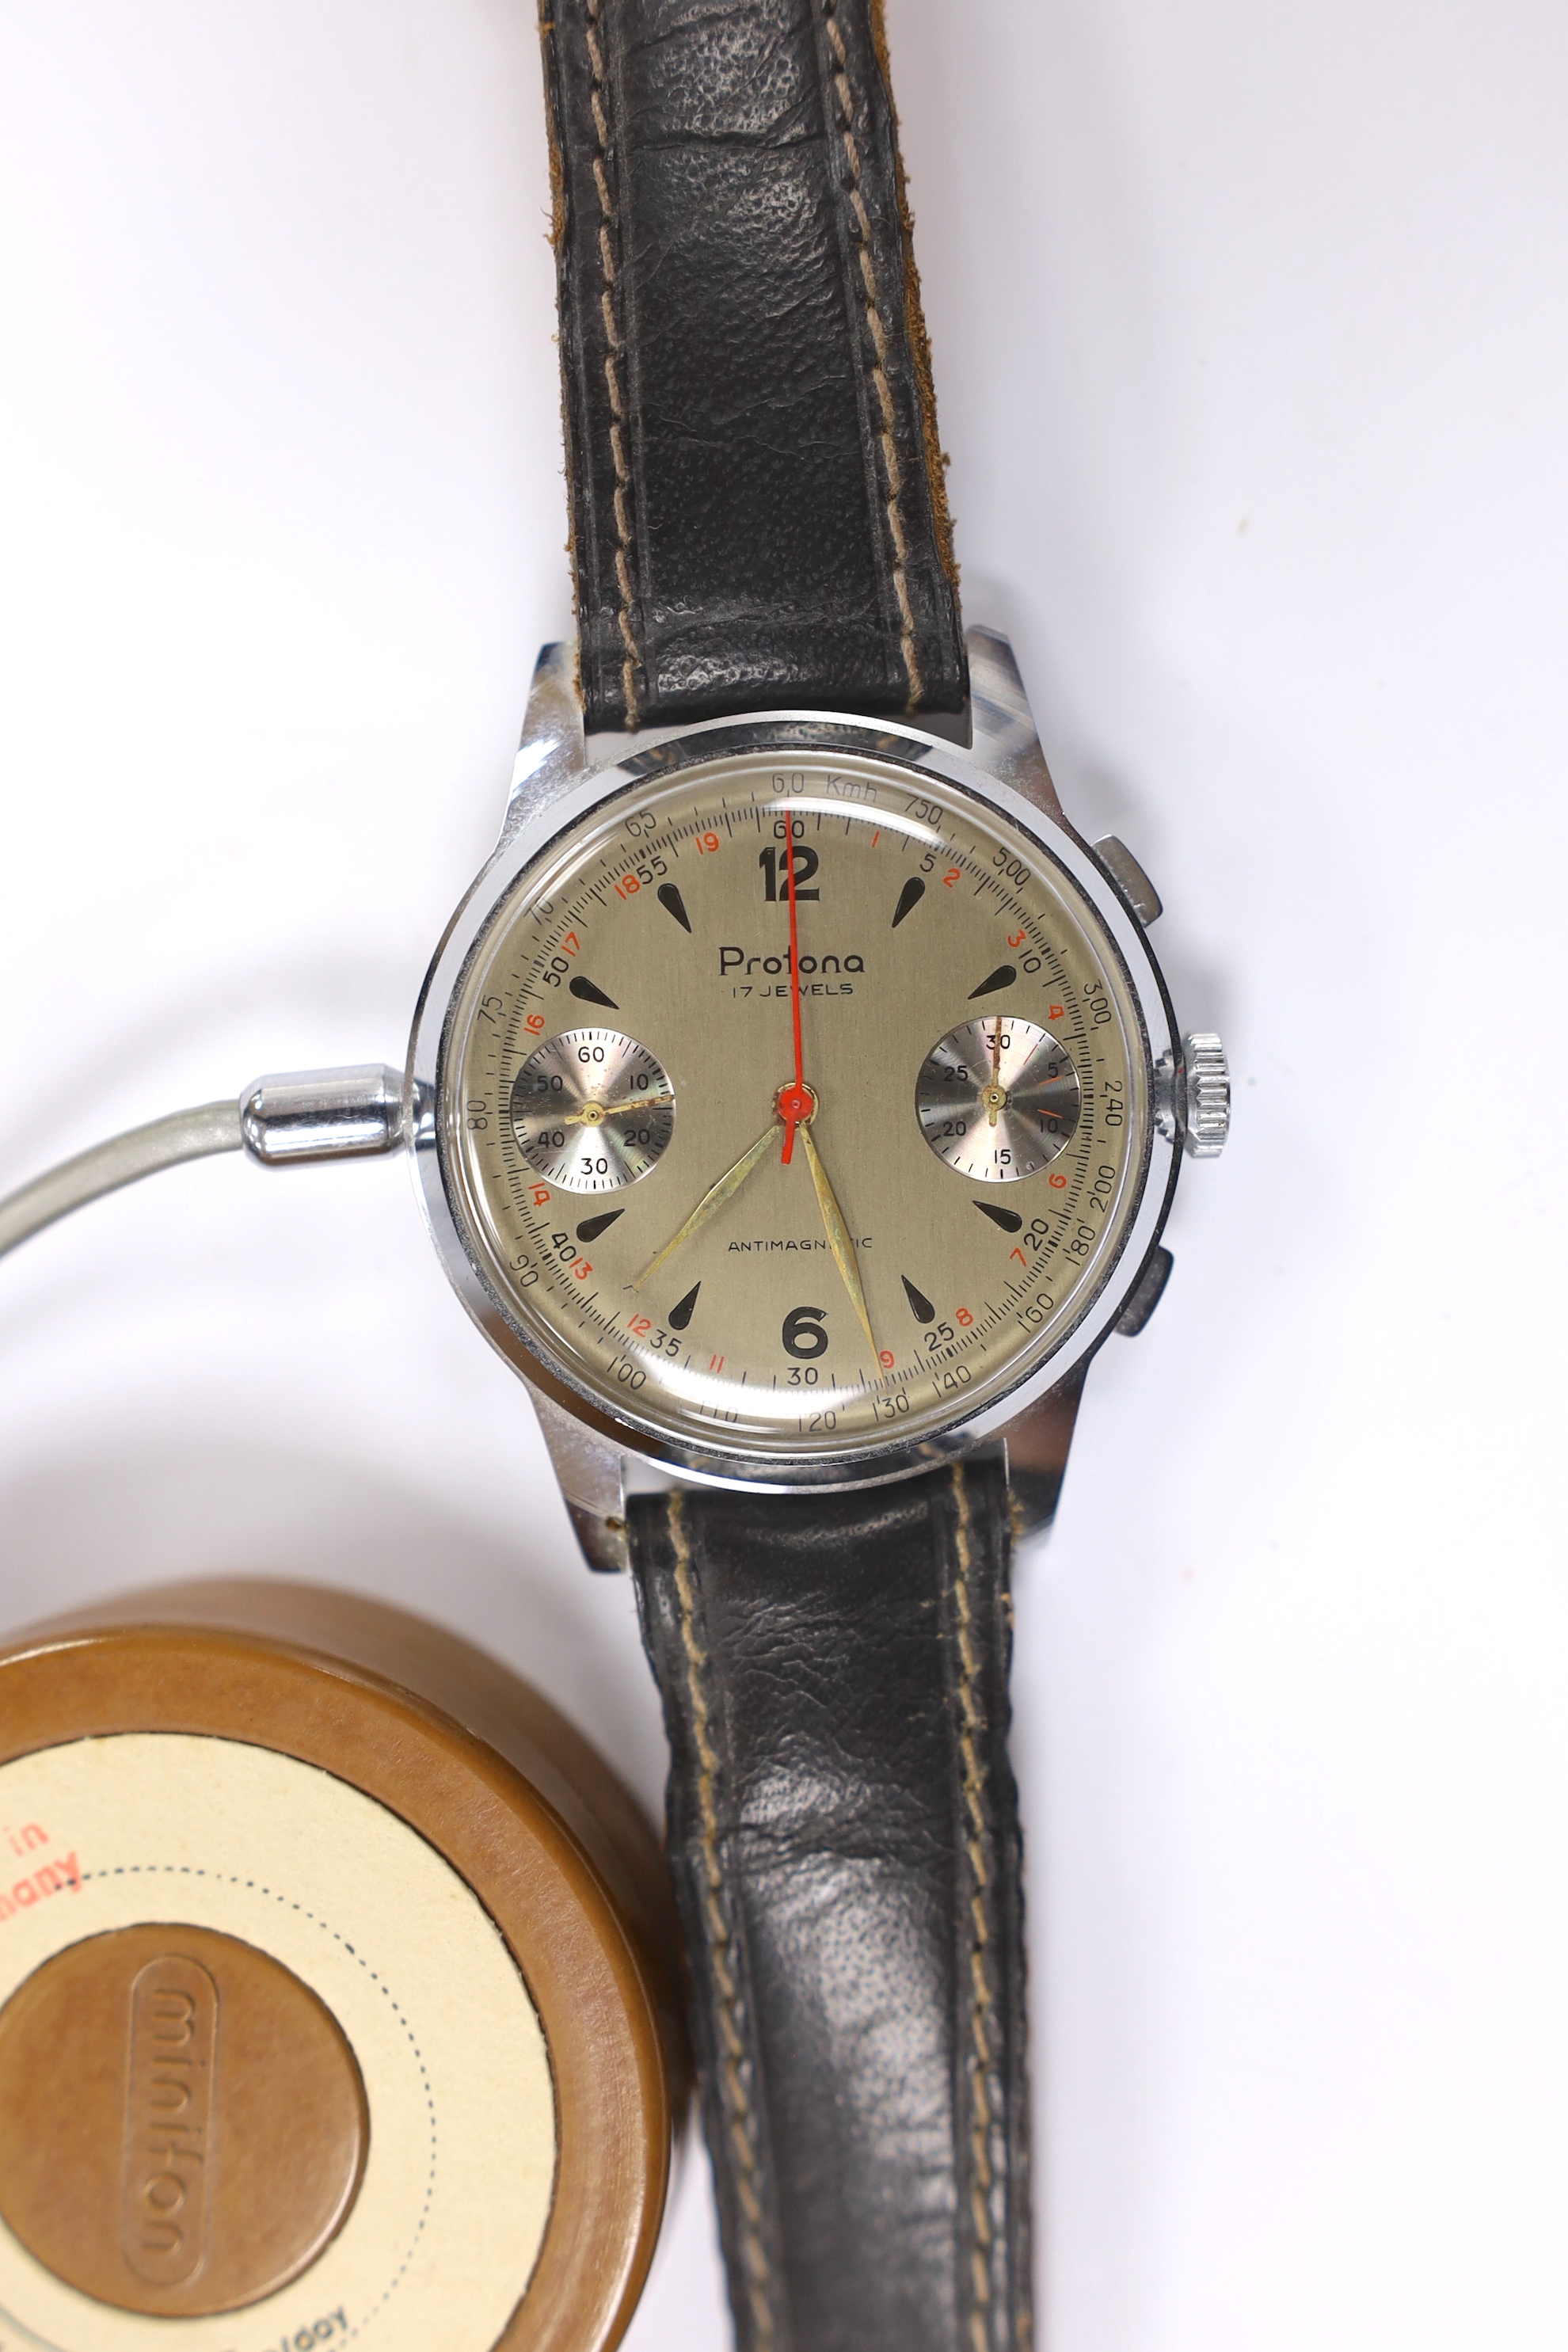 A gentleman's 1950s German steel Protona Minifon Surveillance wrist watch with cables and attachments.